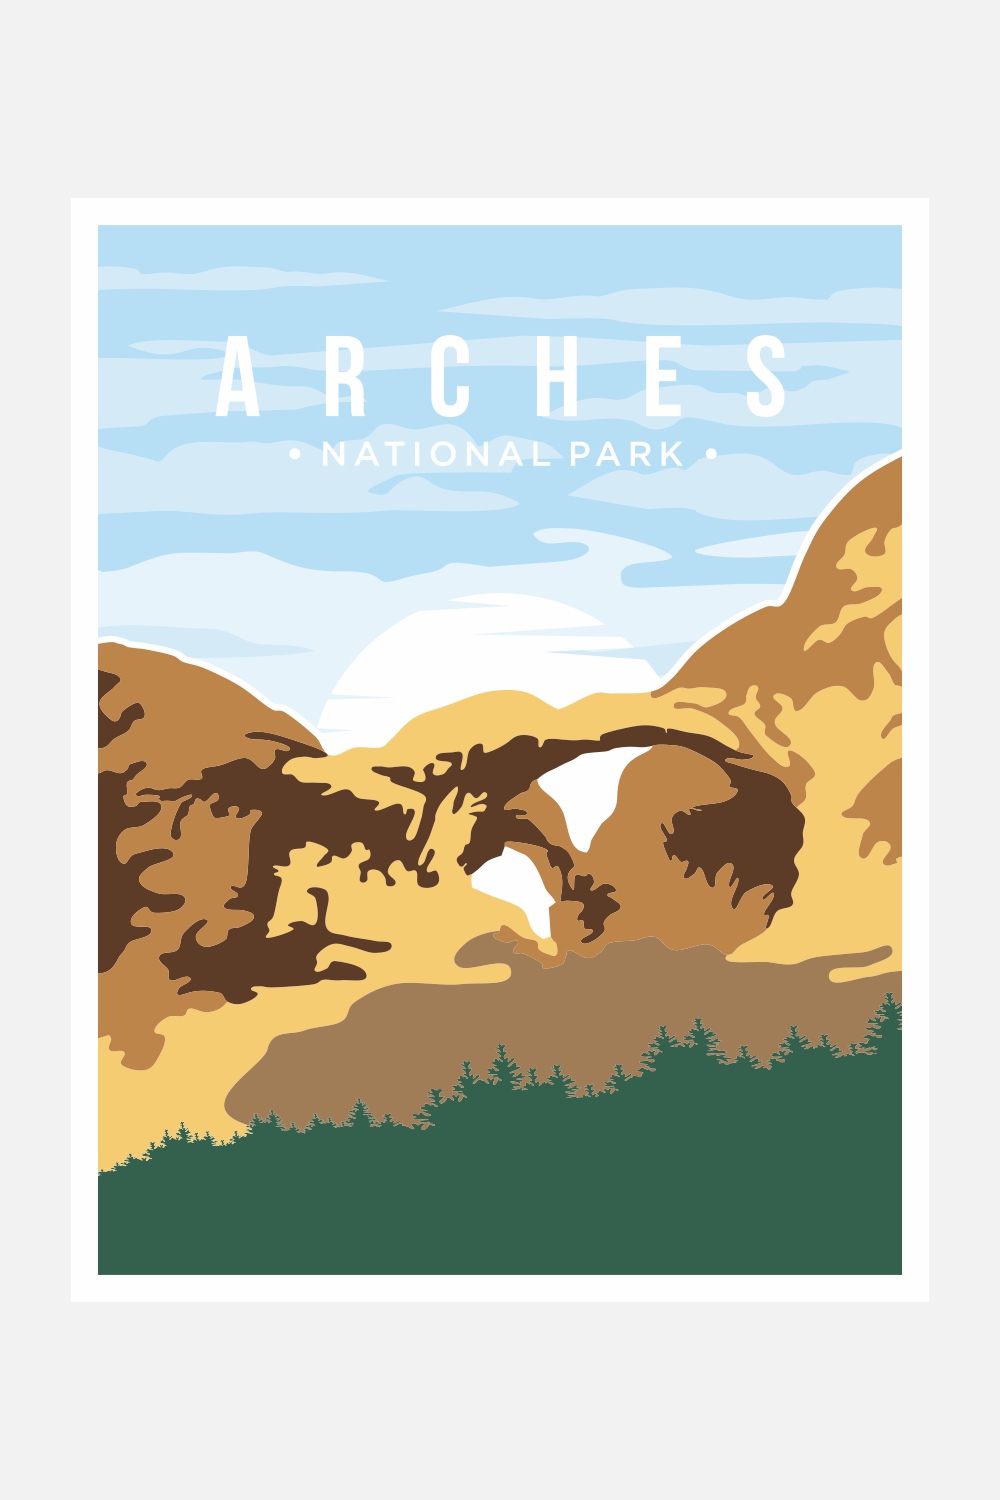 Arches National Park poster vector illustration design - only $8 pinterest preview image.